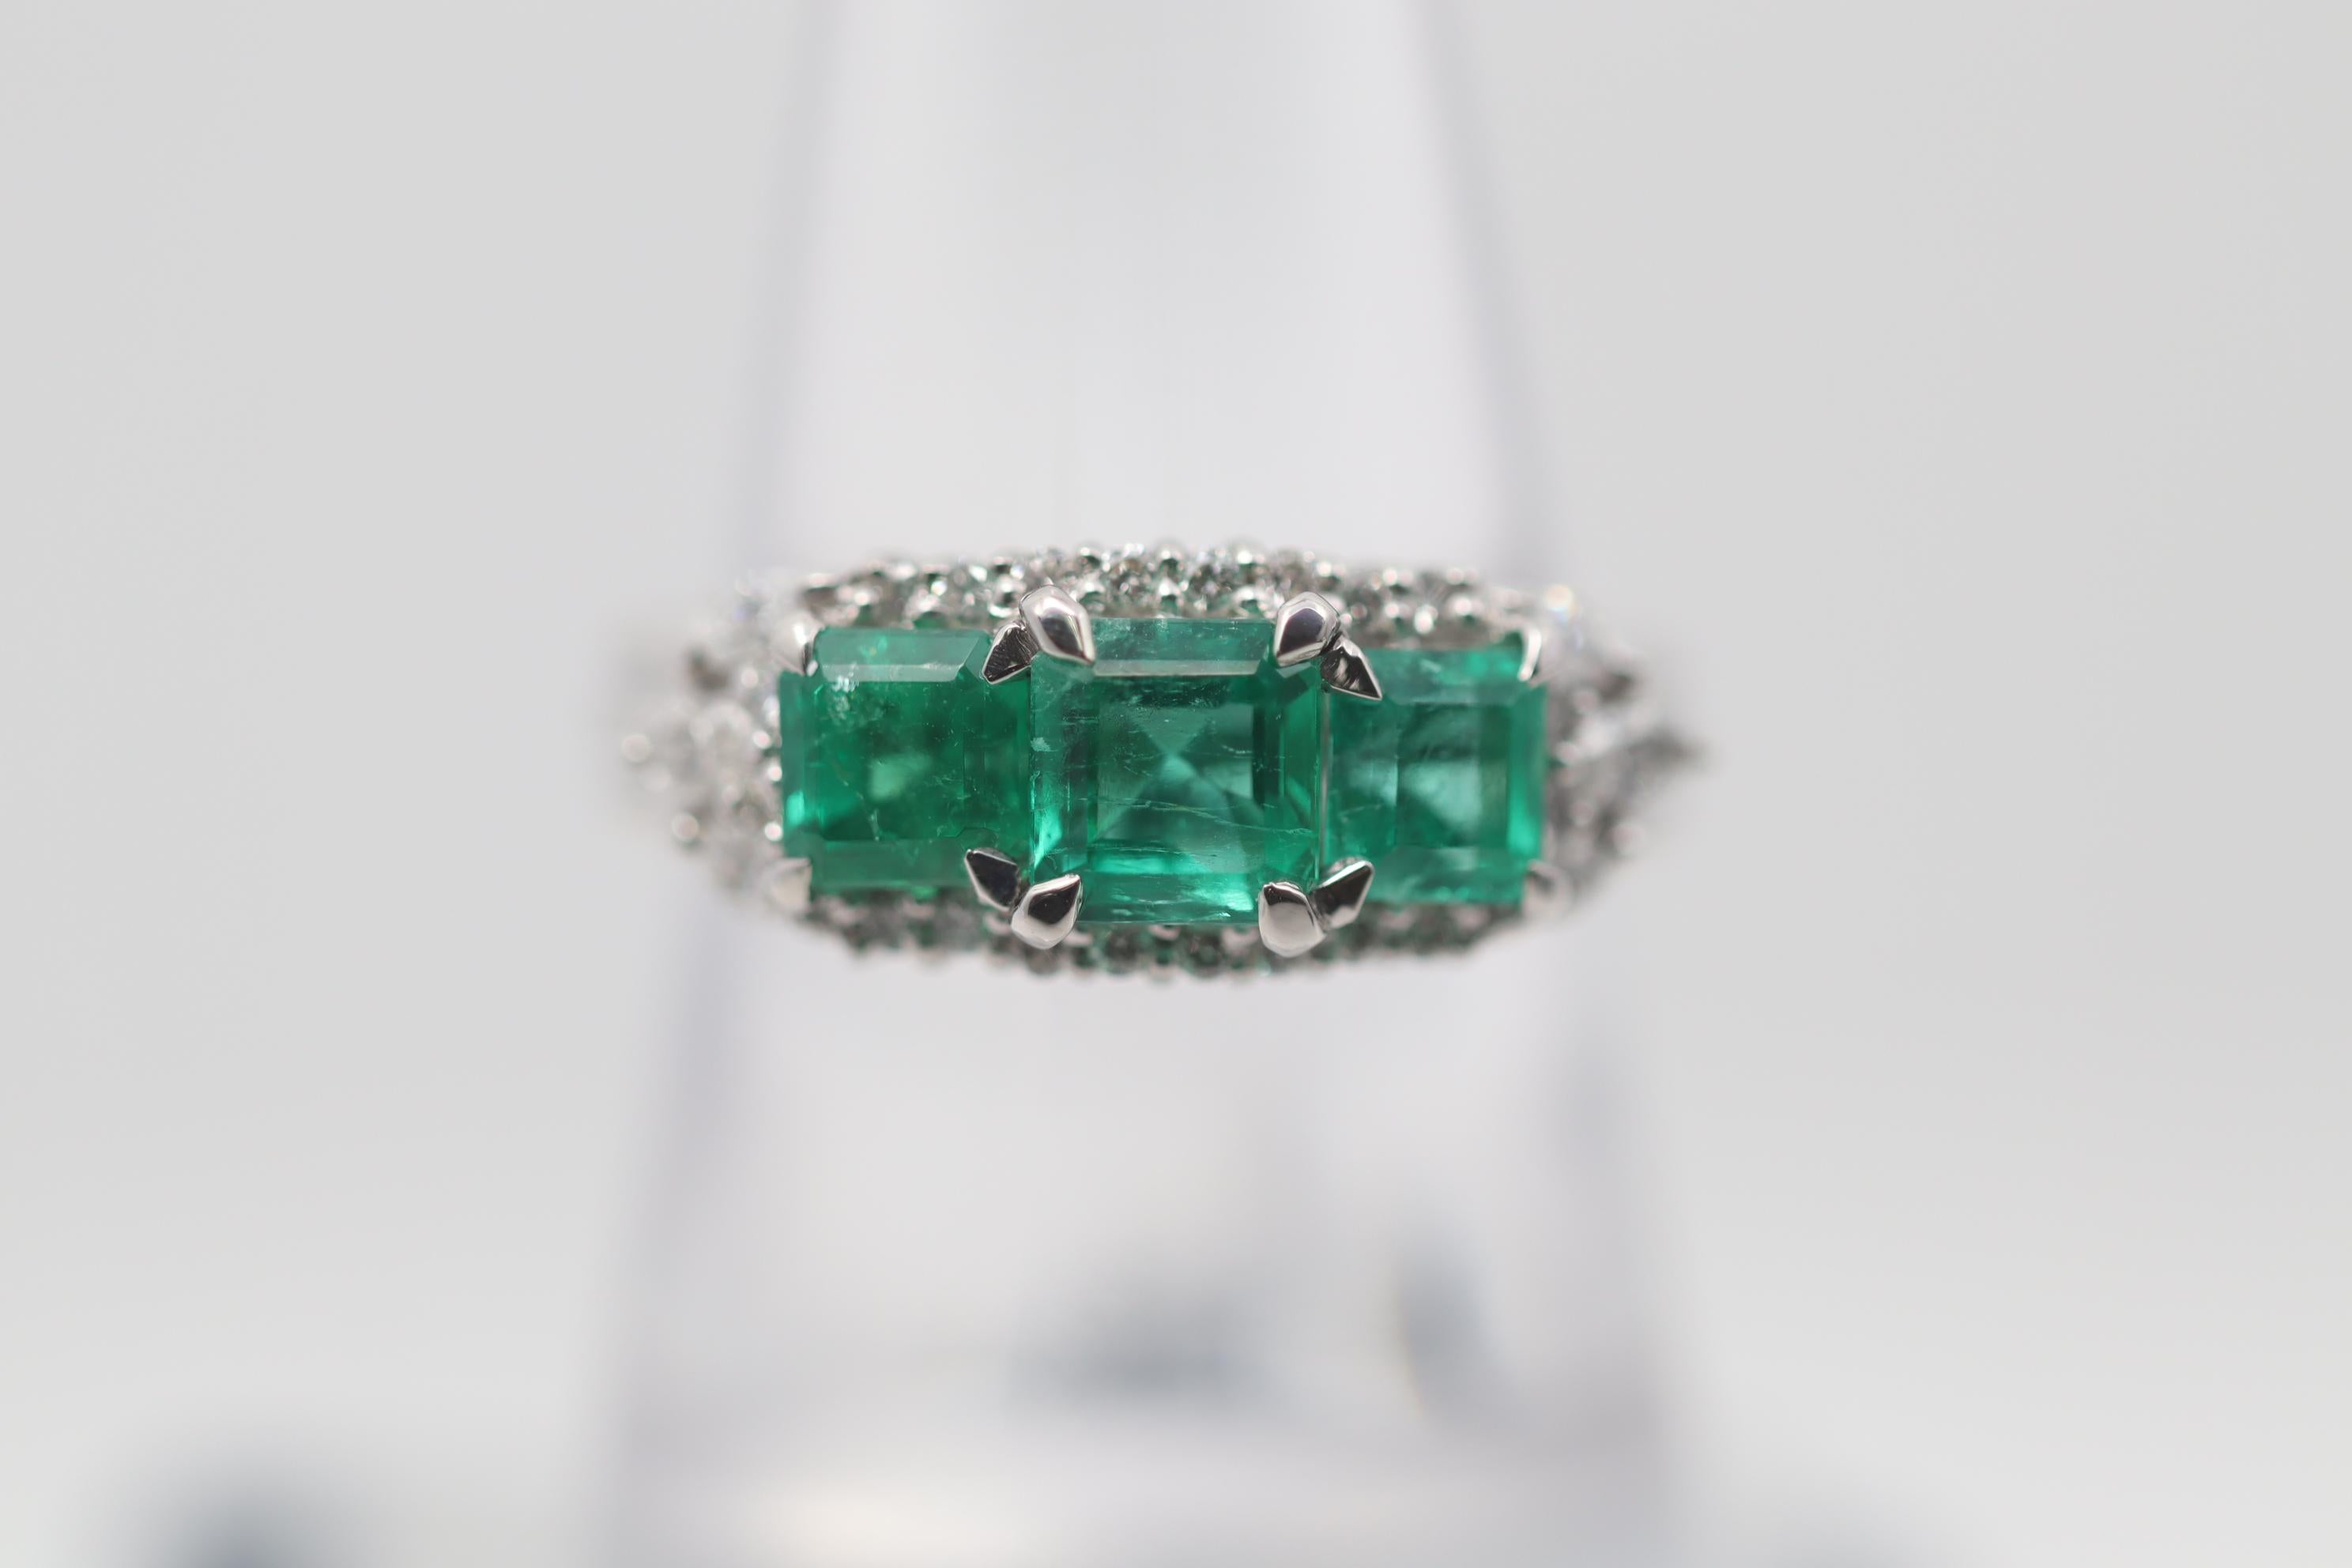 Three superb gem-quality emeralds set side by side steal the show! They weigh a total of 1.88 carats and have a rich clean grass green color with excellent brightness. They are accented by 0.45 carats of round brilliant-cut and marquise-shaped